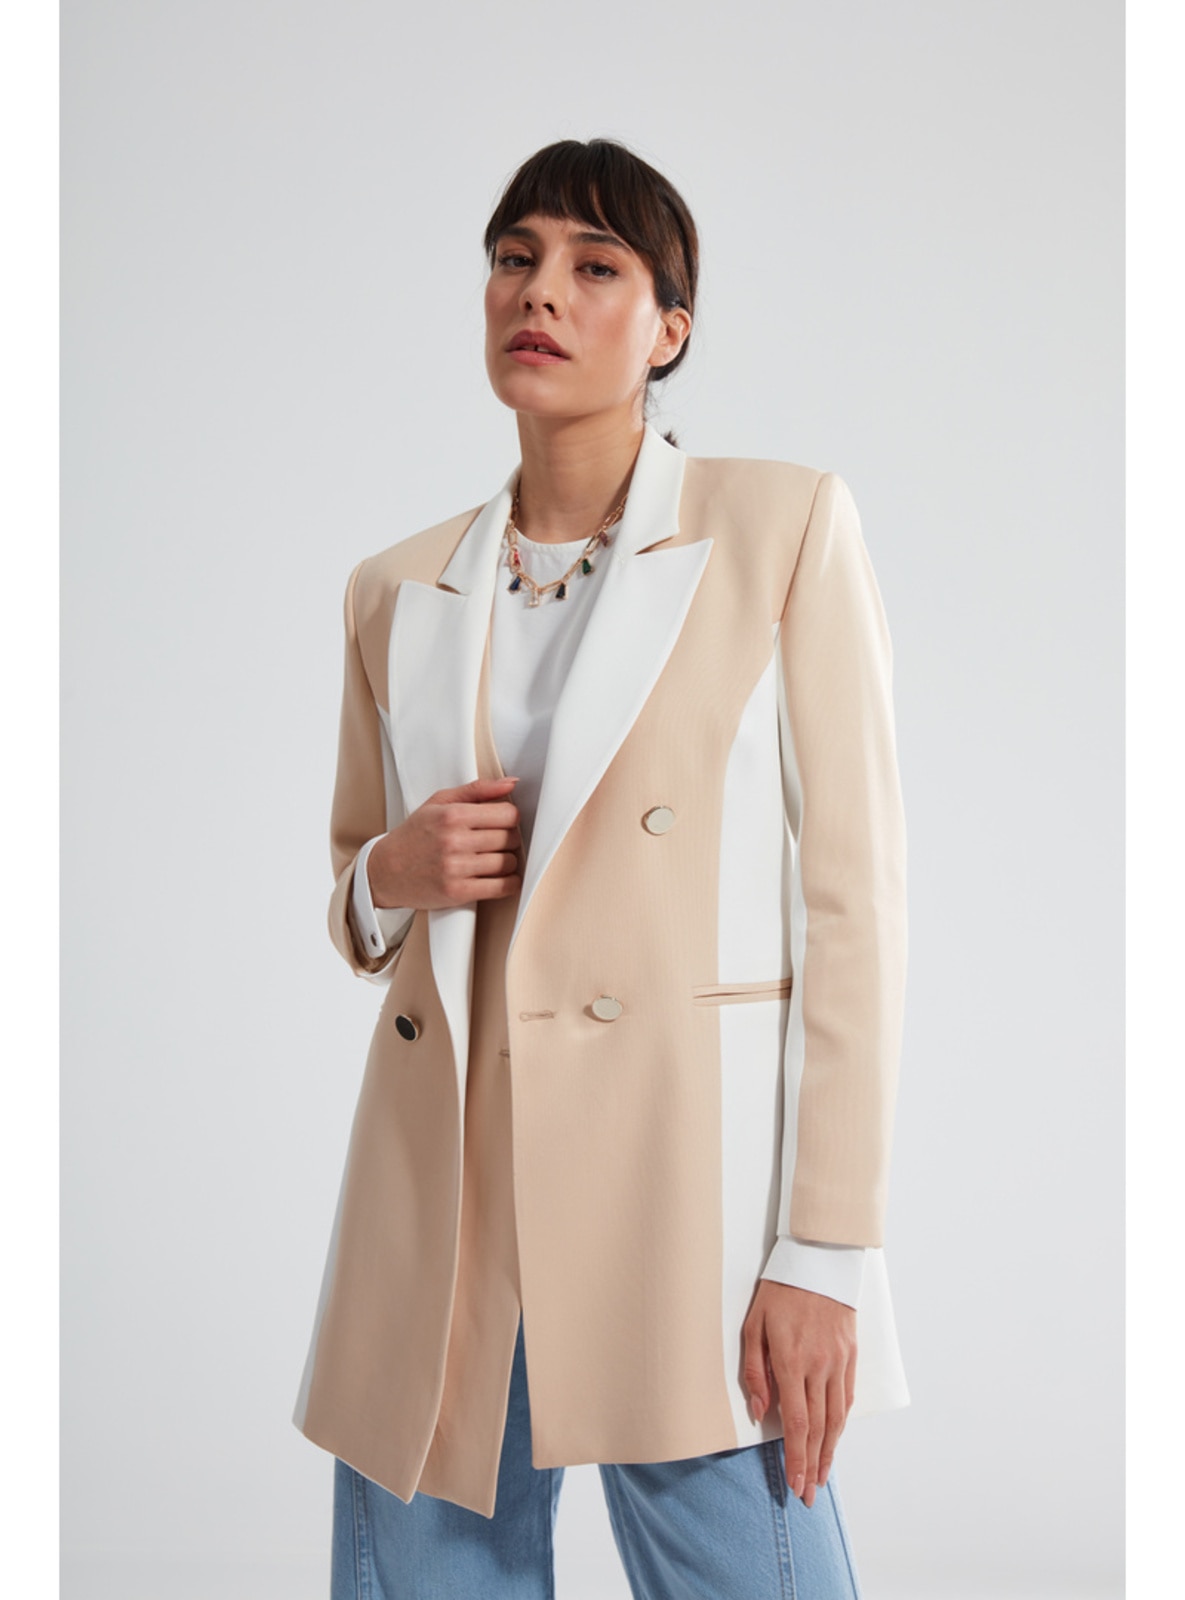 Beige - Fully Lined - Double-Breasted - Jacket